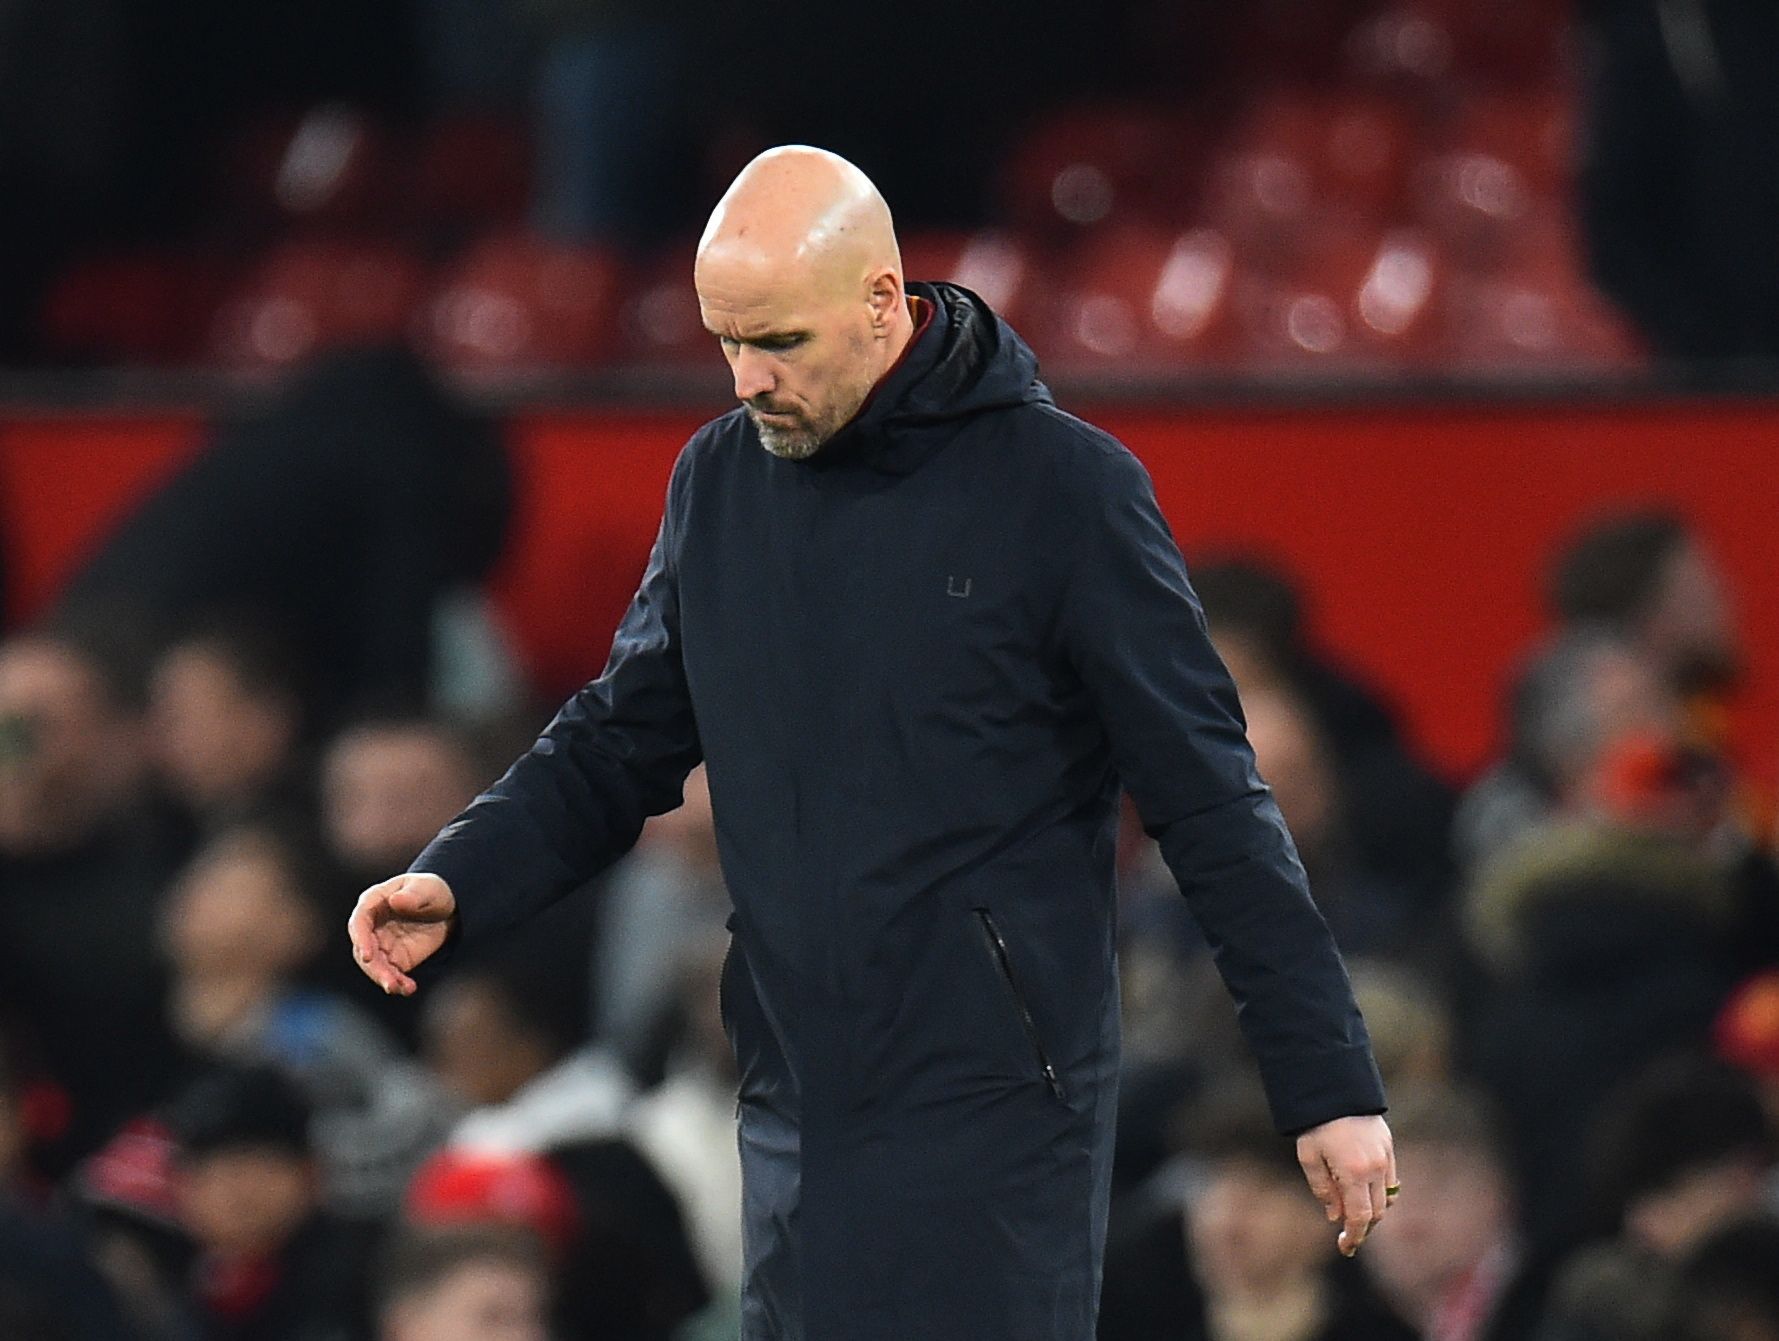 Manchester United manager Erik ten Hag looking disappointed after game